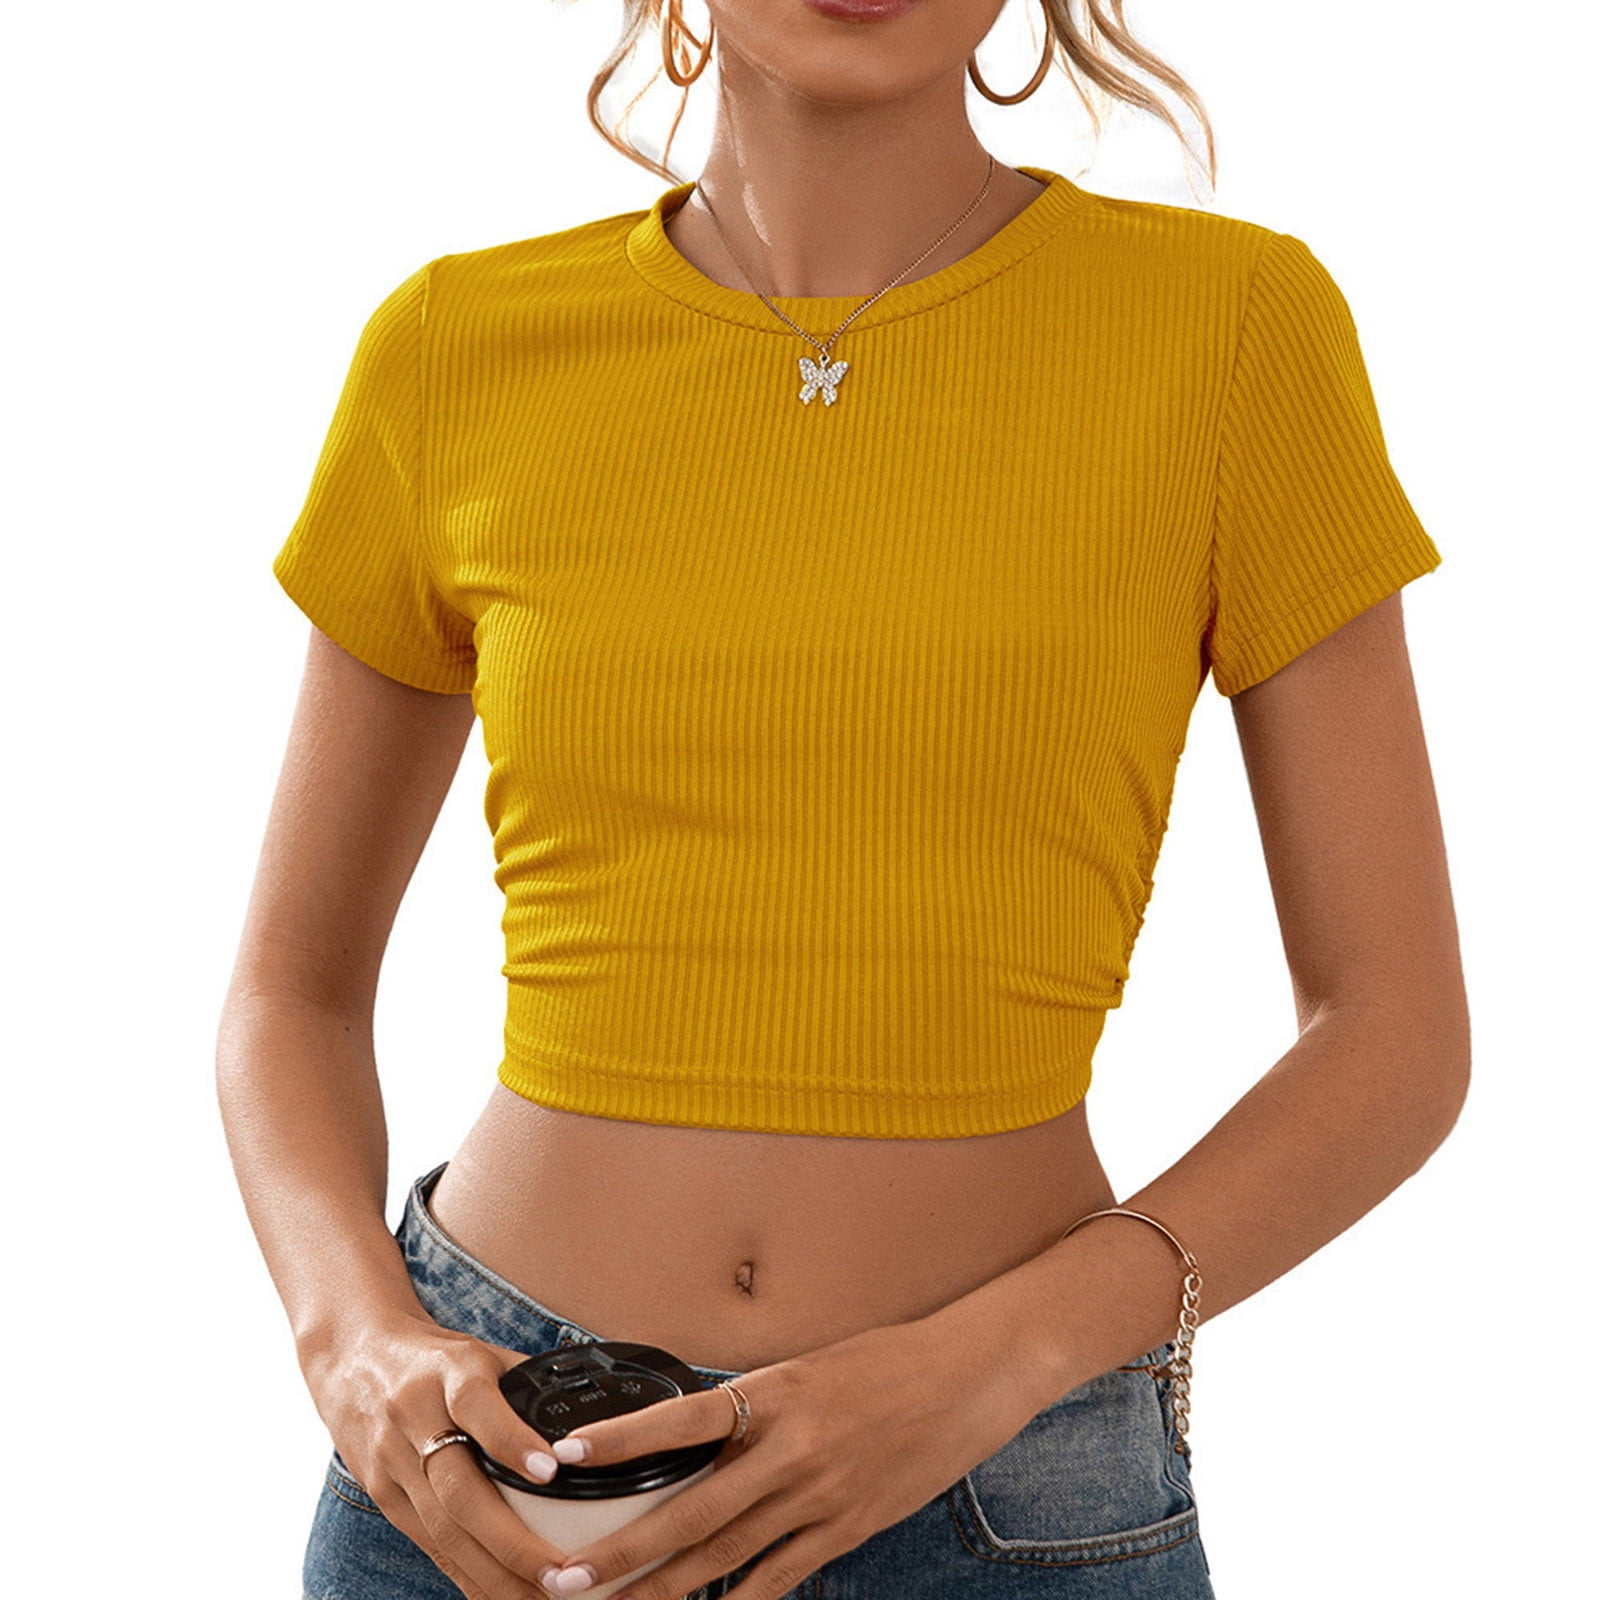 Summer Sleeve Top Blouse Tee Teen Knit Crop Crewneck Shirts Ribbed T-Shirt(Yellow,M) Casual RQYYD Workout Slim Discount Fit Women\'s Short Basic Solid